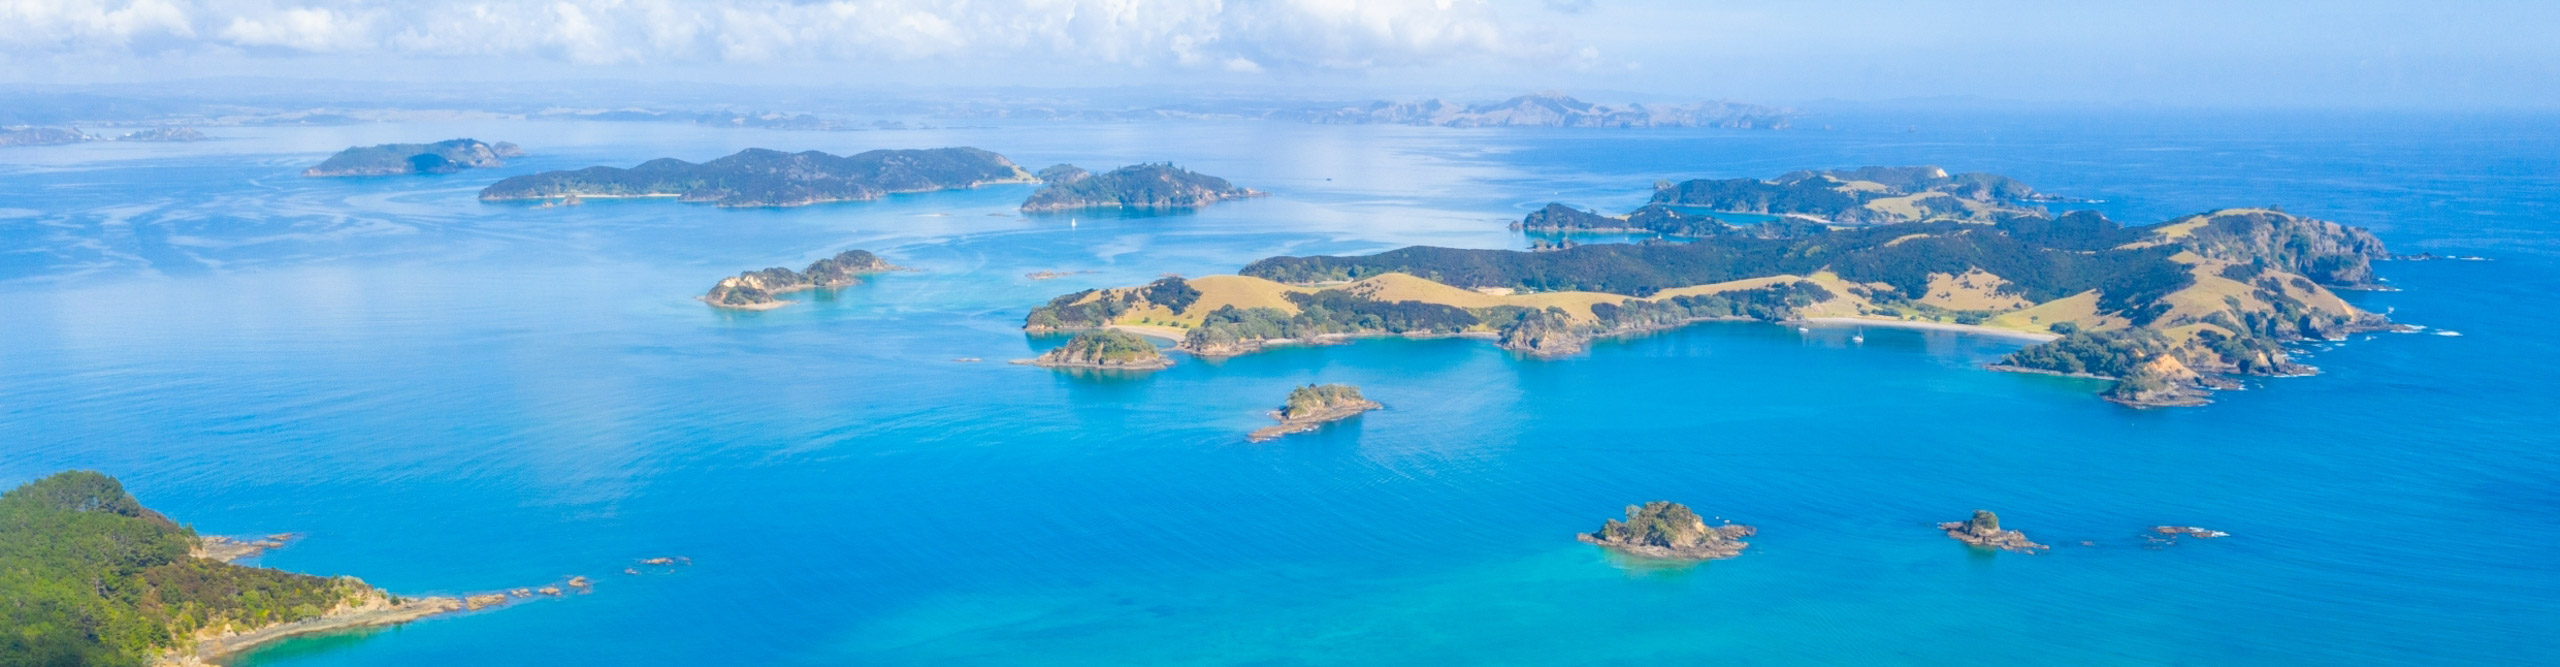 Aerial view. of the bay of islands on a clear sunny day, North Island, New Zealand